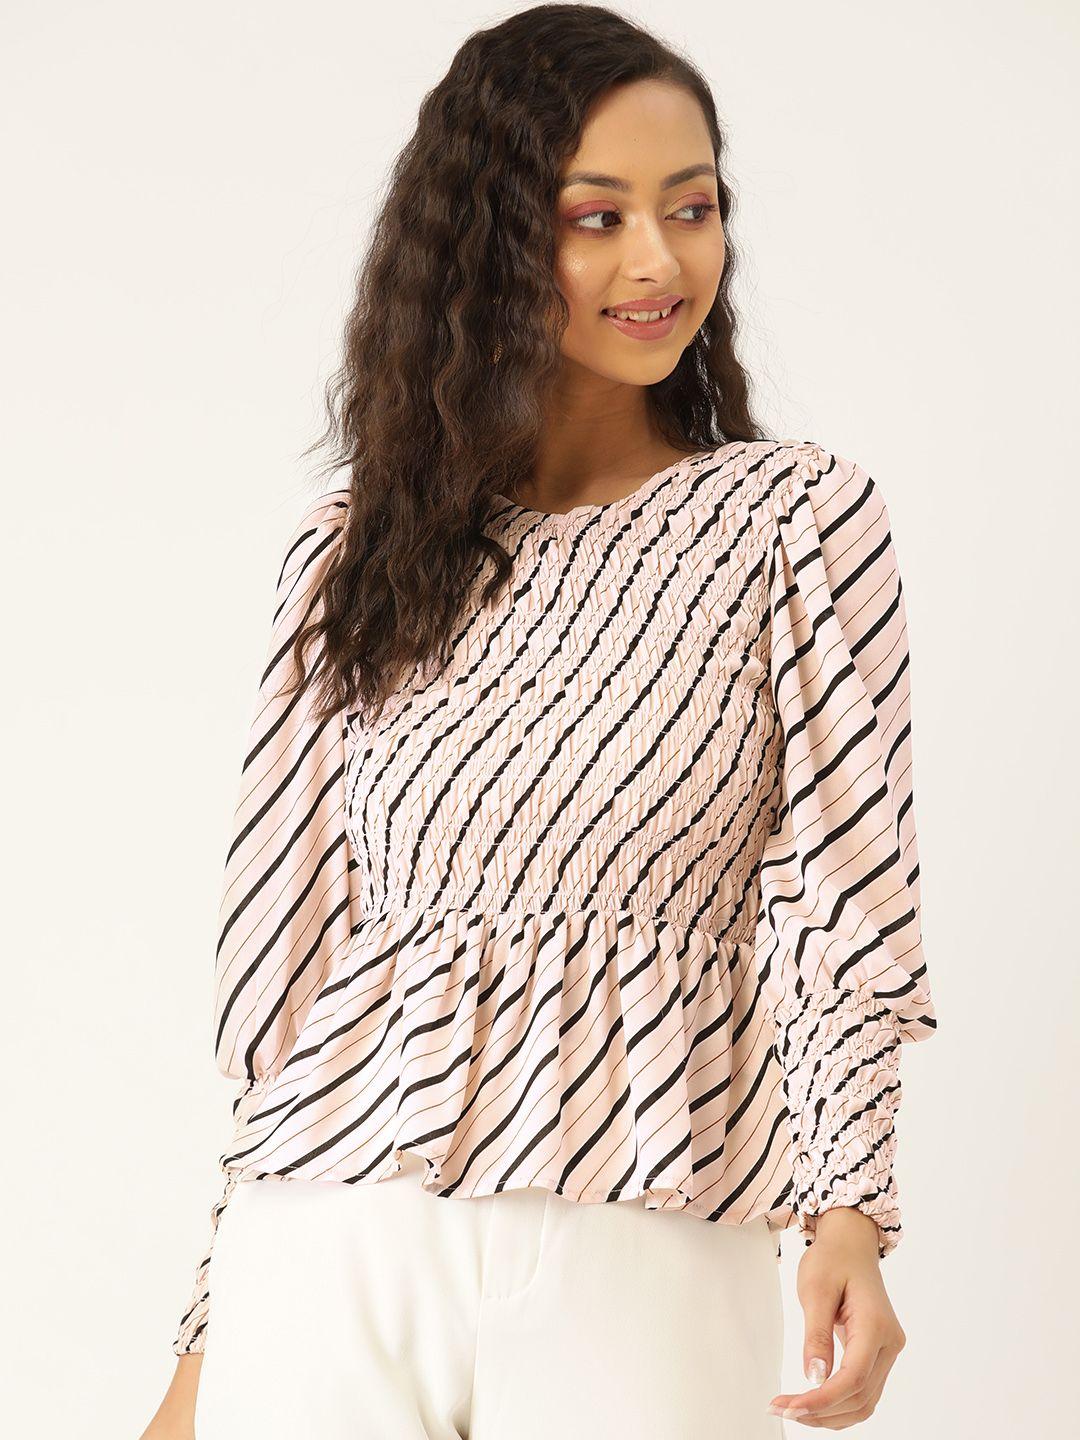 label regalia women pink & black striped puff sleeves a-line top with smocked detail